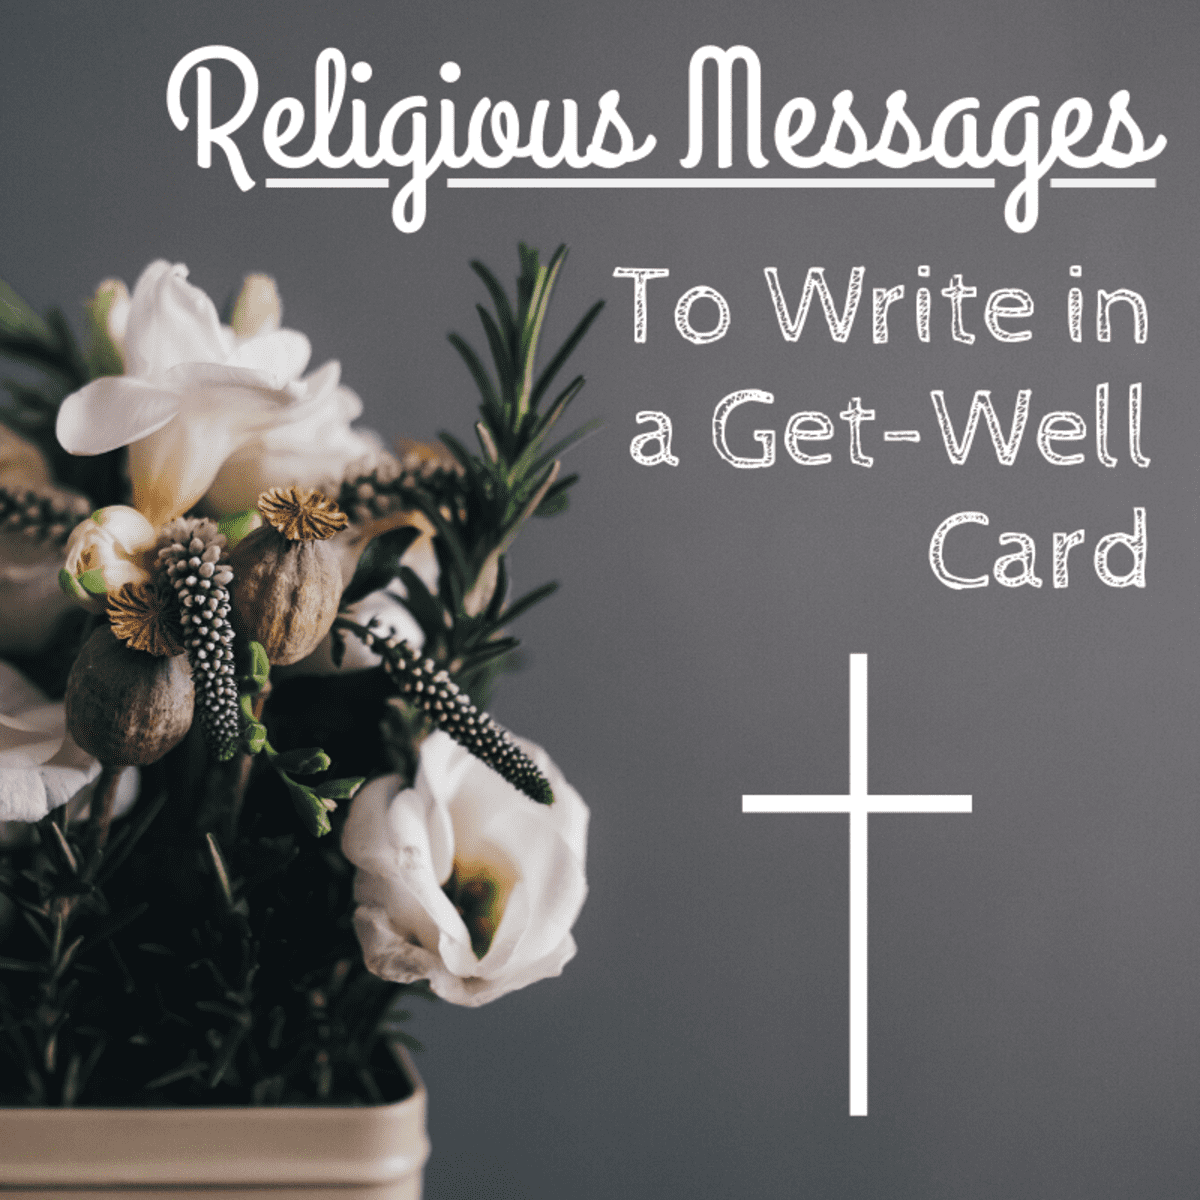 Wishes and Prayers to Write in a Religious 